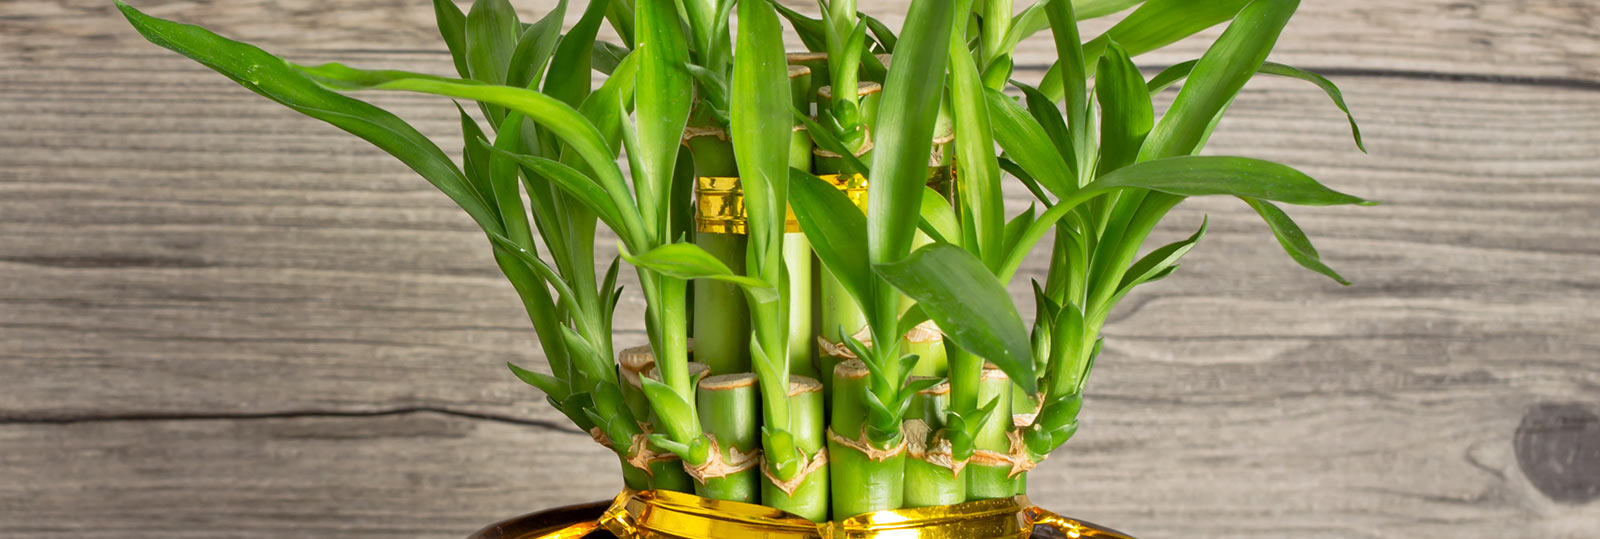 Bulbs & Bamboo Gift Delivery – Chicago Floral Designs